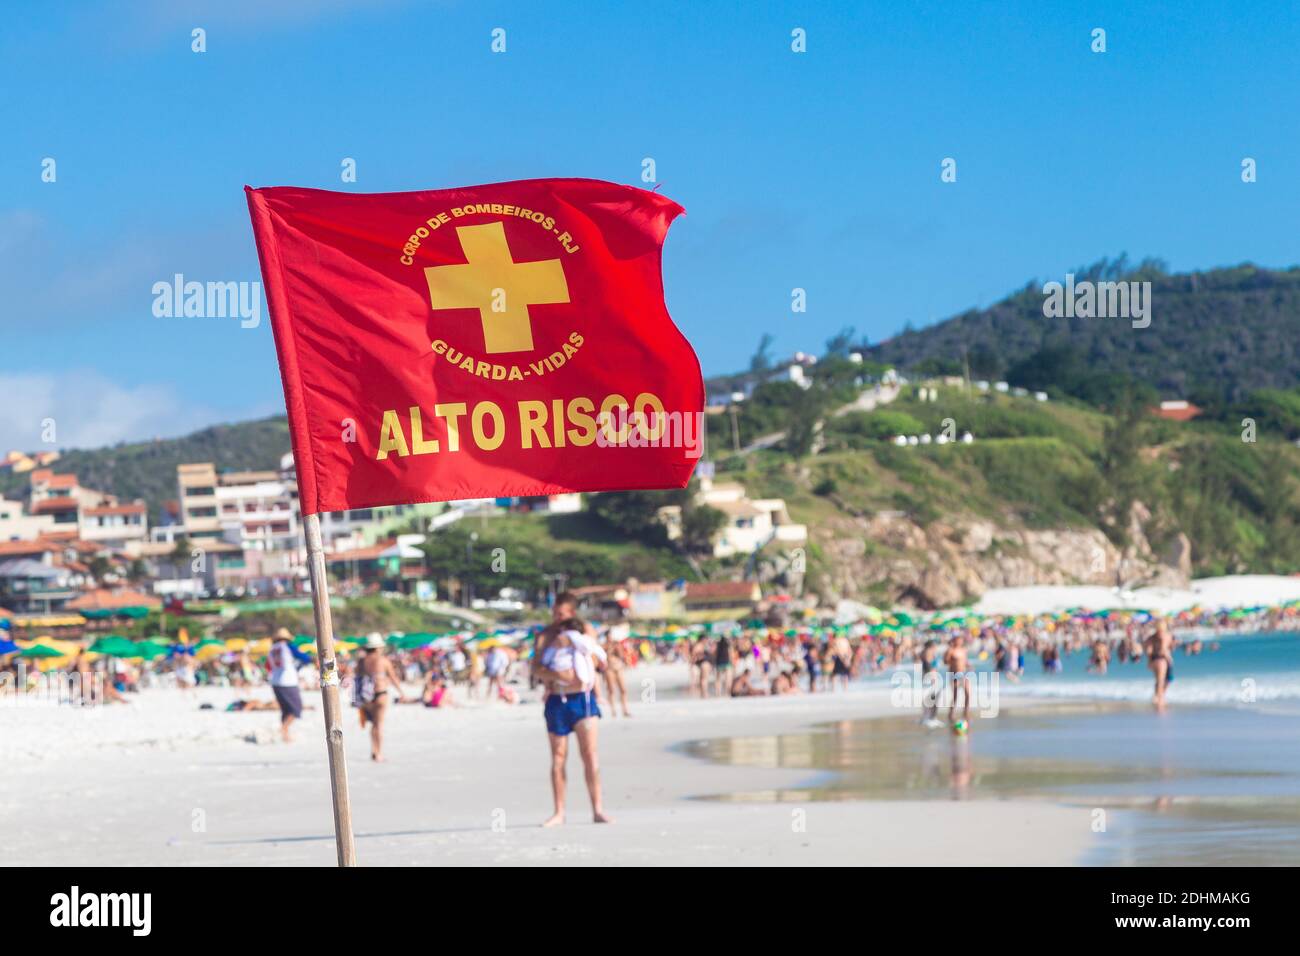 ARRAIAL DO CABO, RIO DE JANEIRO, BRAZIL - DECEMBER 26, 2019: Warning sign of a red flag at Praia Grande. At background People in the beach. Stock Photo